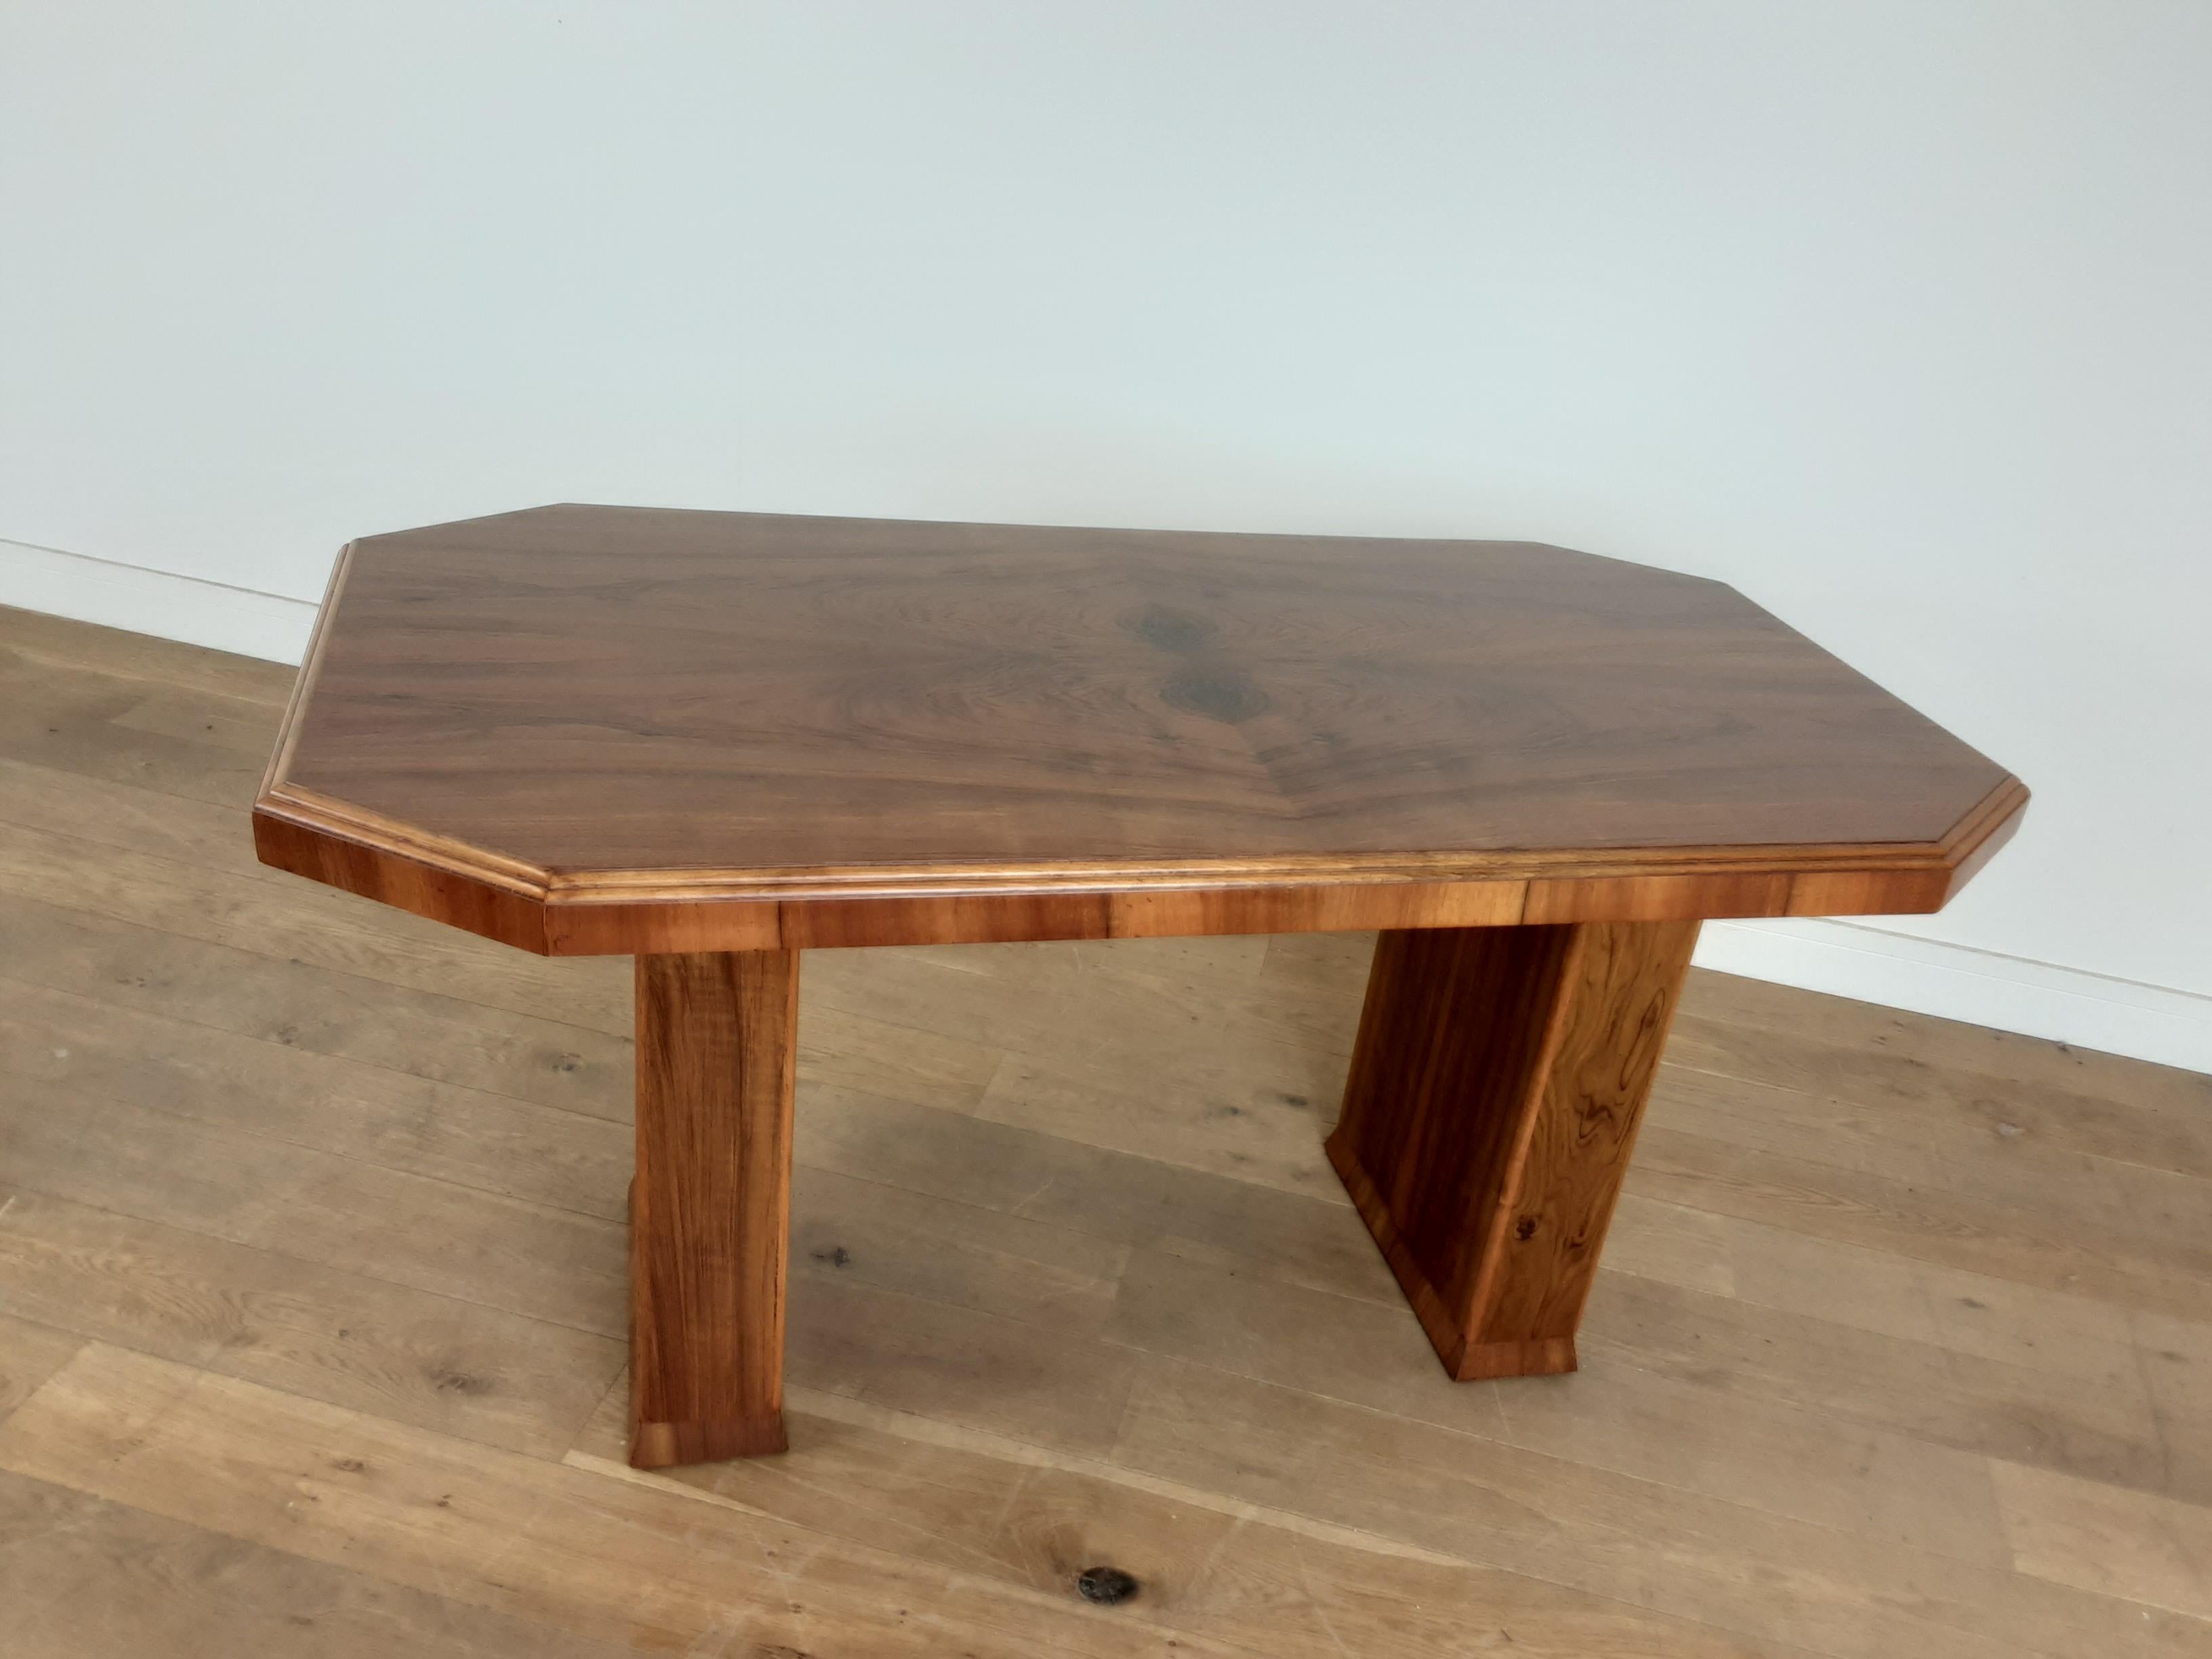 Art Deco walnut dining table.
Figured walnut dining table on two pillar supports.
Very pretty and functional table, a very nice style with the double curve to the edges, giving a very elegant appeal
Measures: 77 cm H, 151 cm W, 81 cm D,
British,